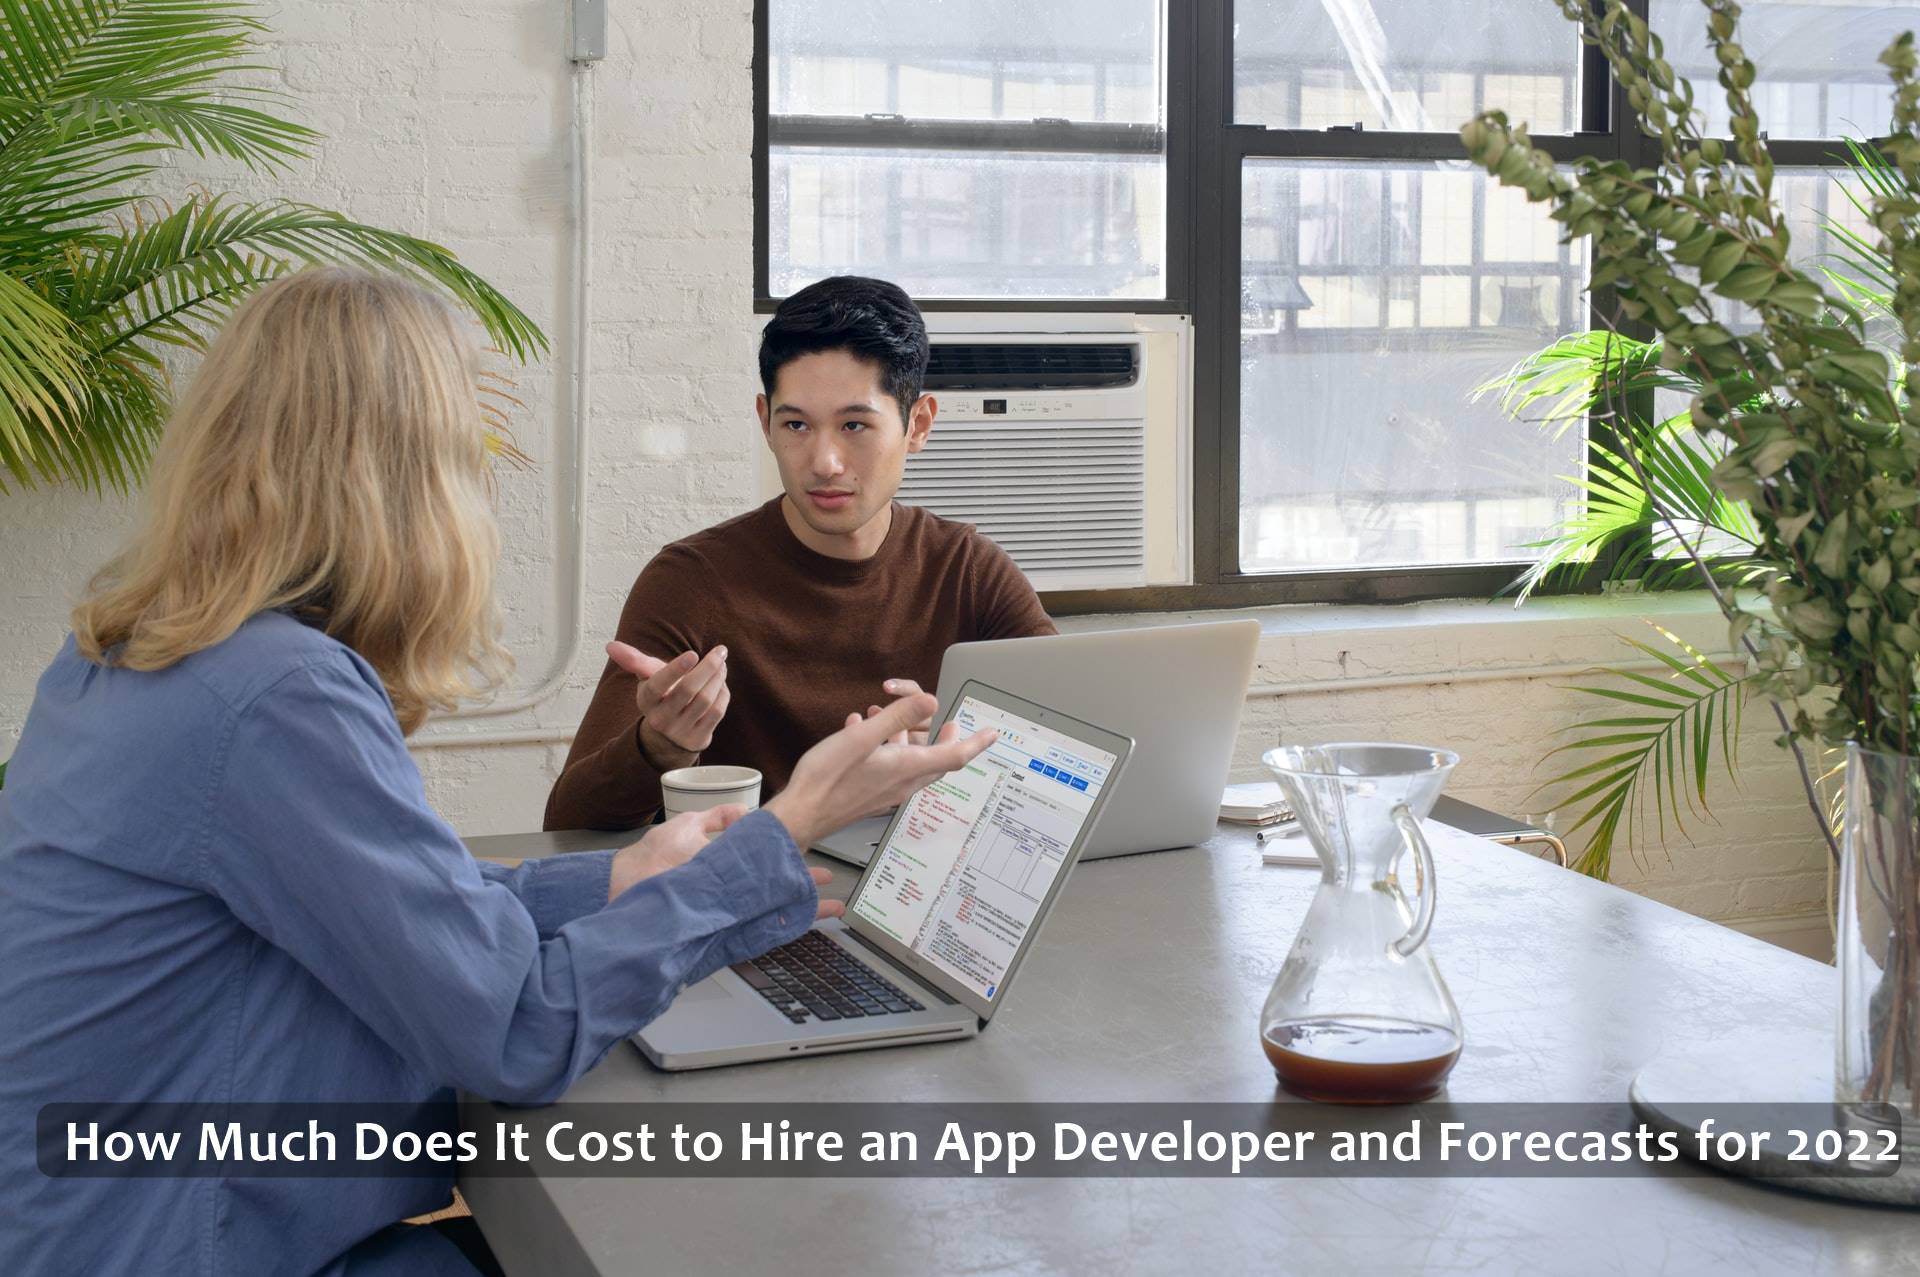 How Much Does It Cost to Hire an App Developer and Forecasts for 2022